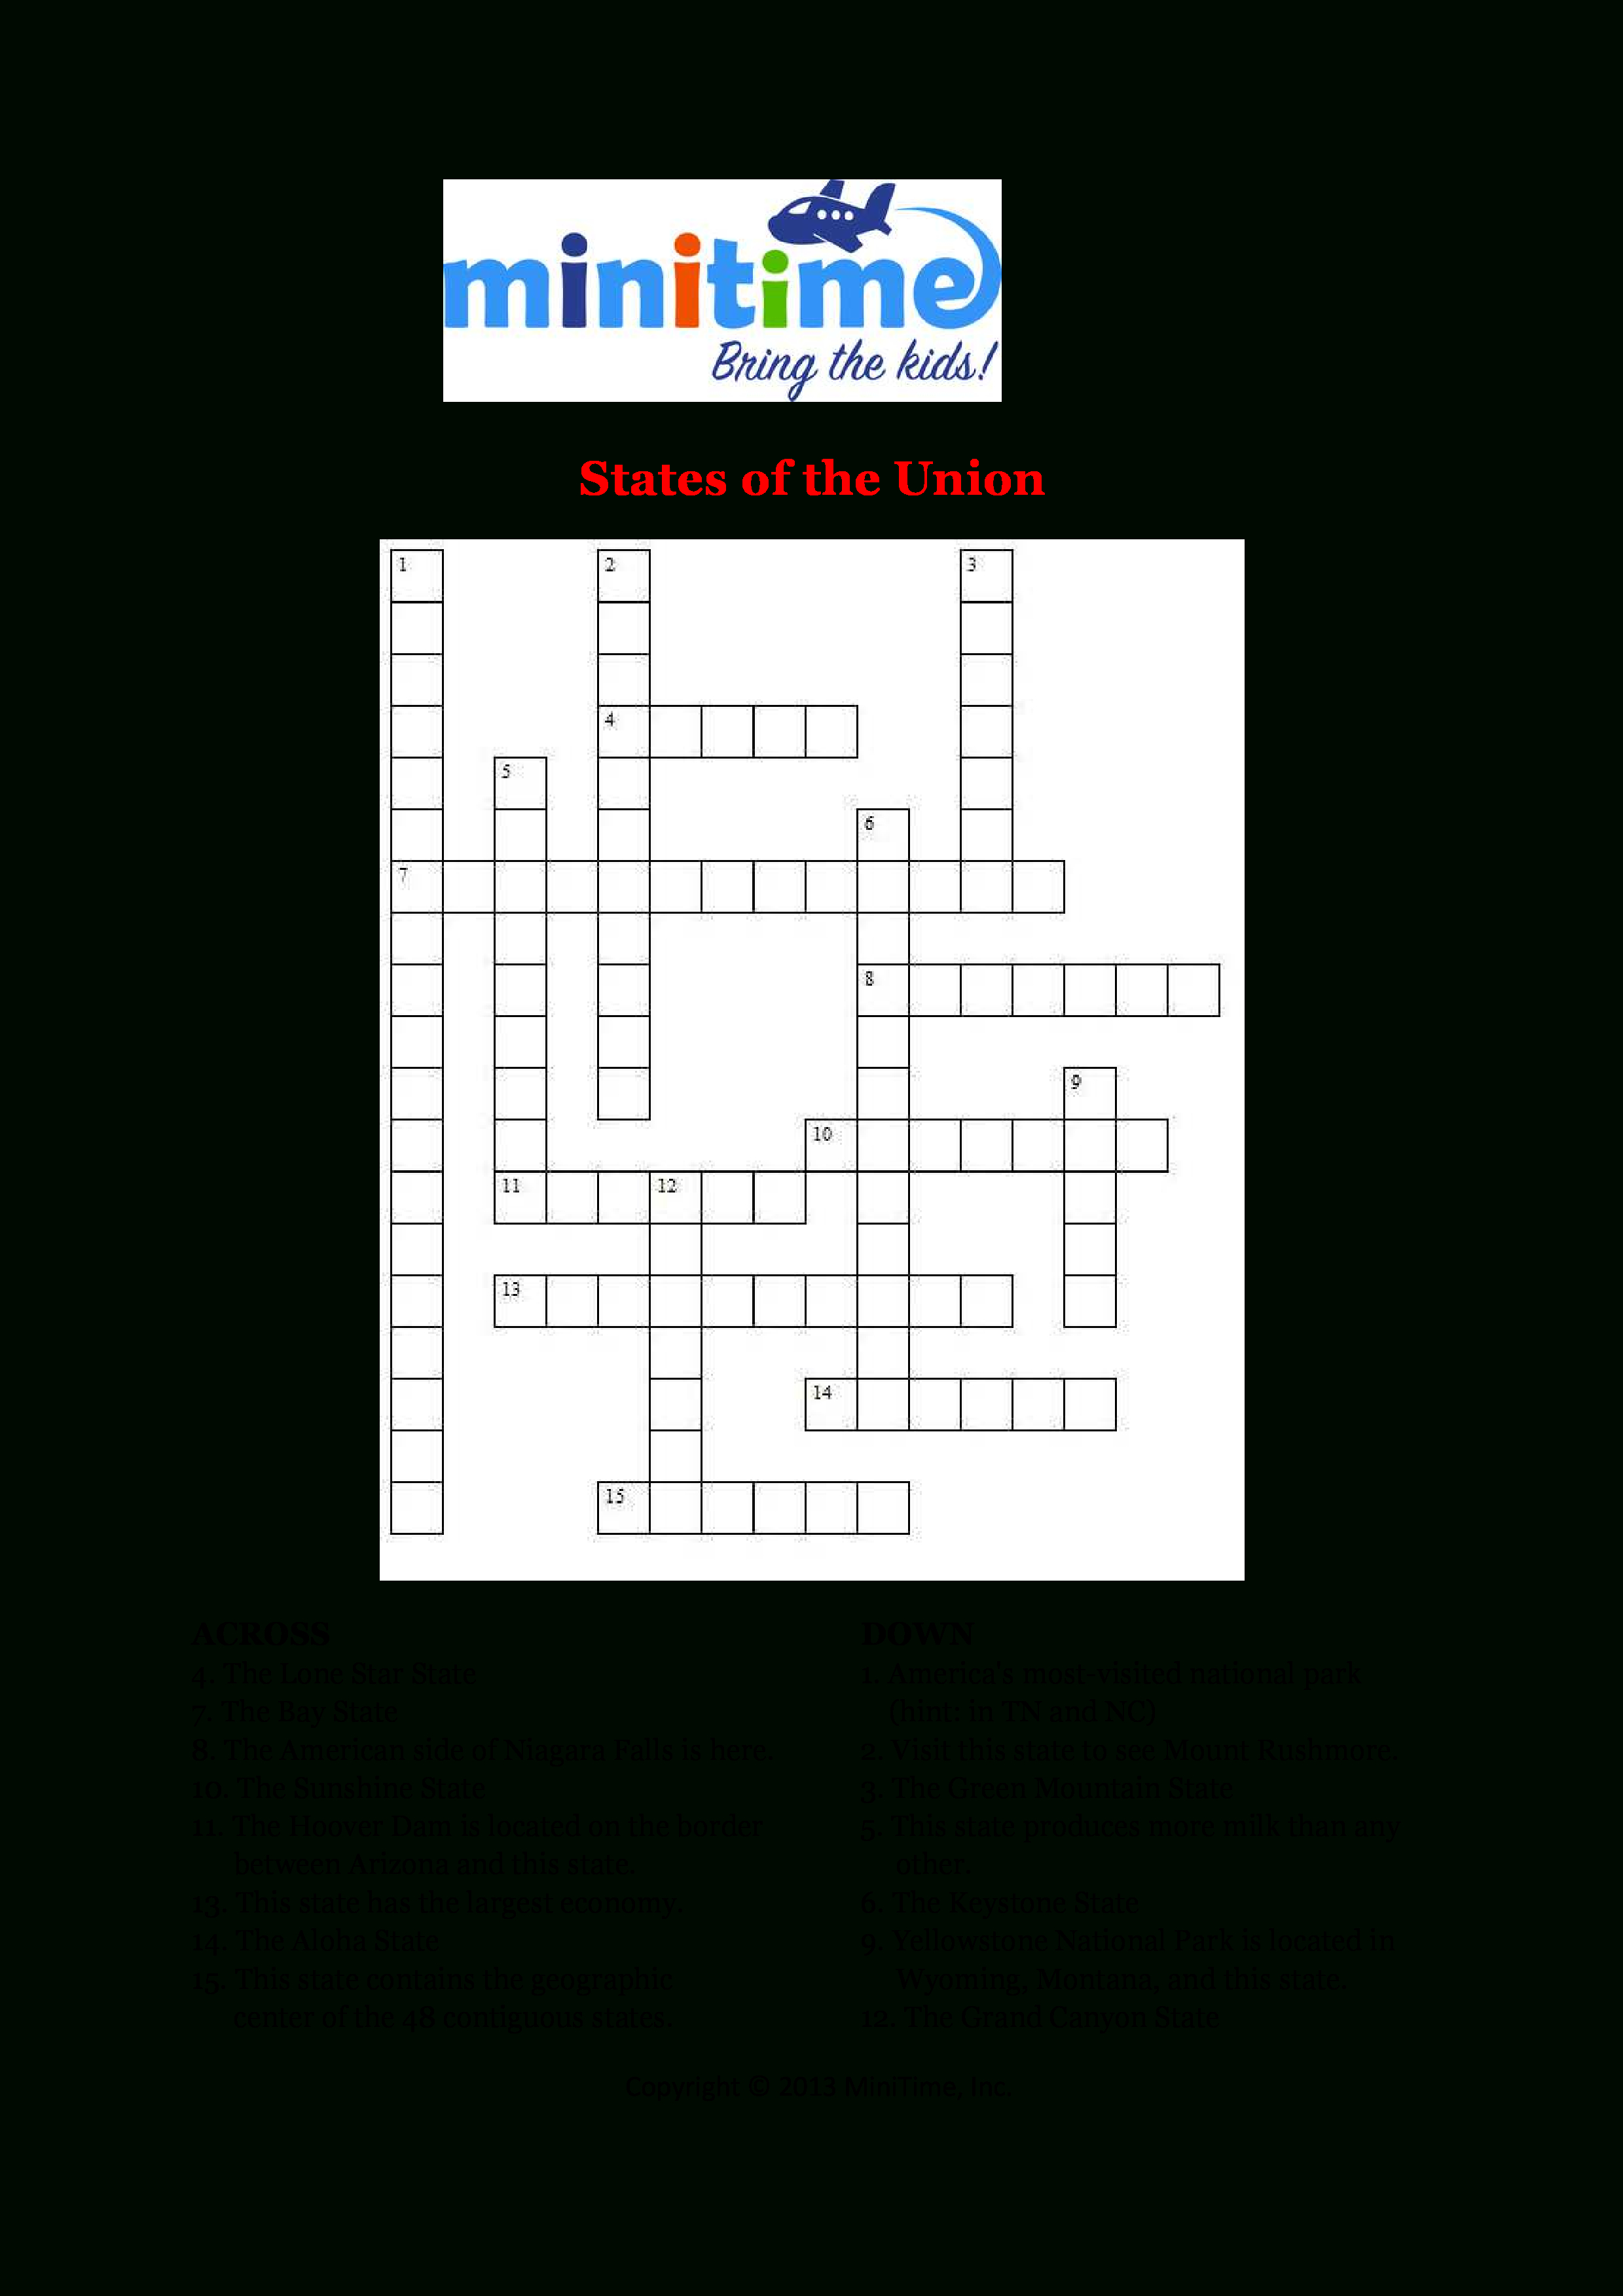 Us States Fun Facts Crossword Puzzles | Free Printable Travel - Car Crossword Puzzles Printable